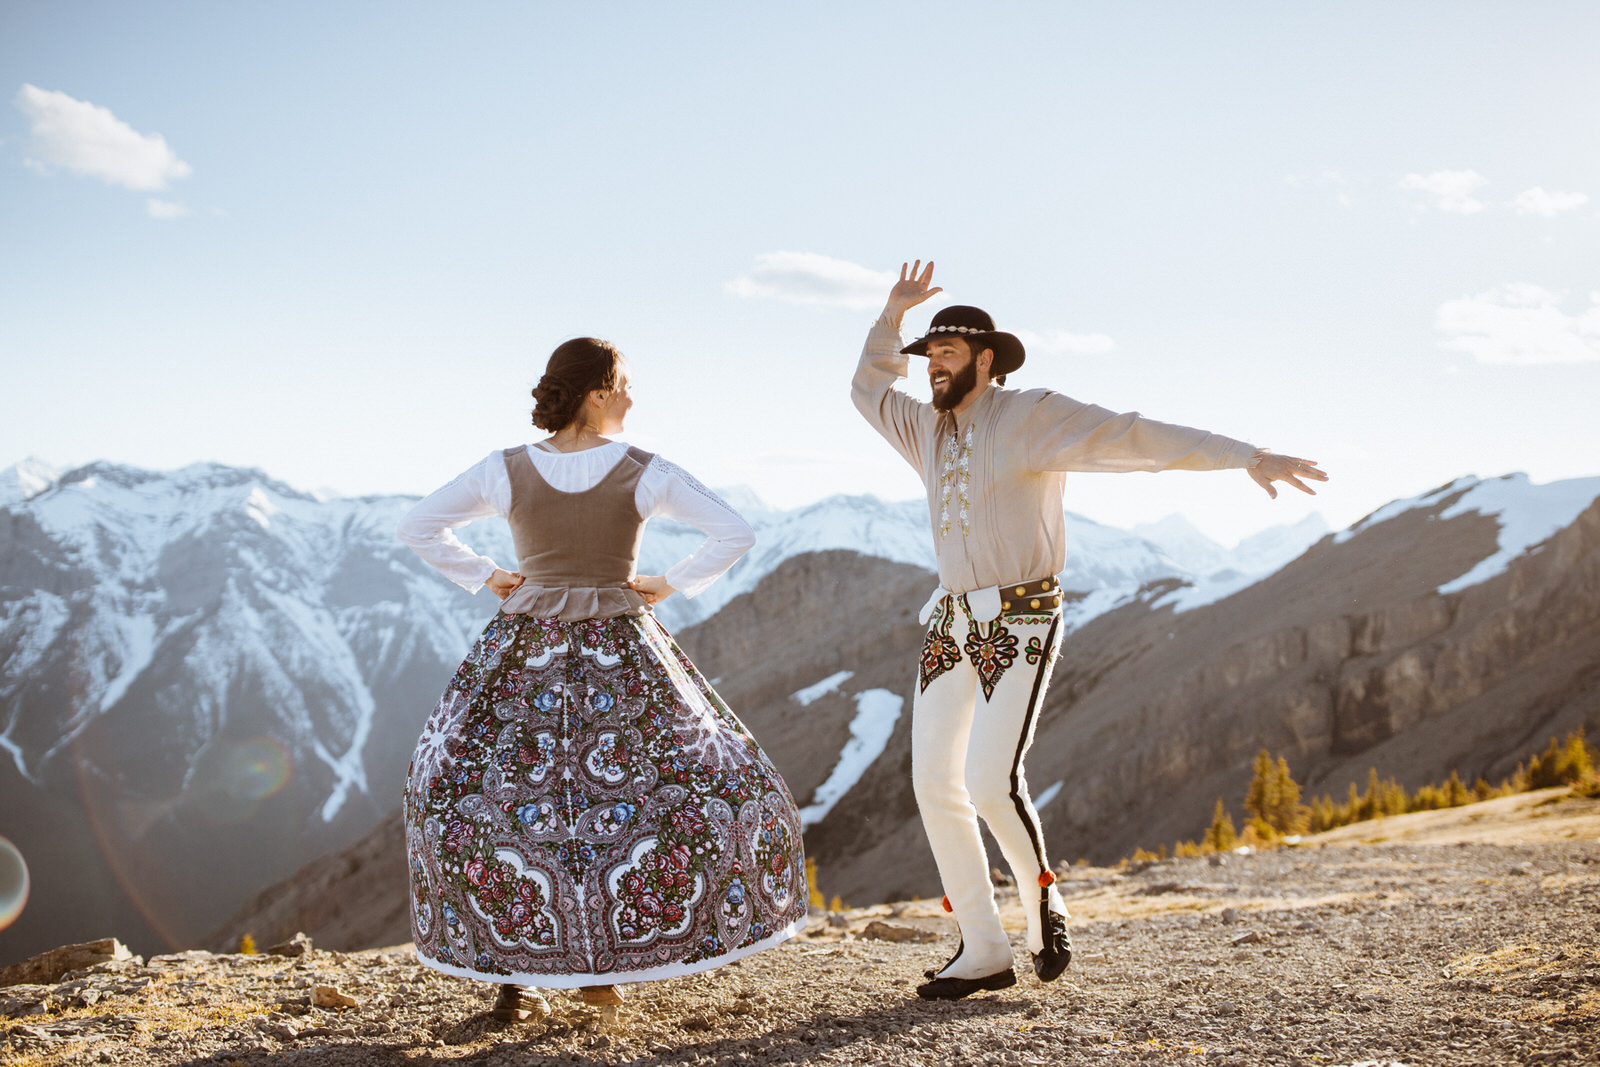 Banff anniversary photographer session in traditional Polish folk dance outfits from the Podhale region